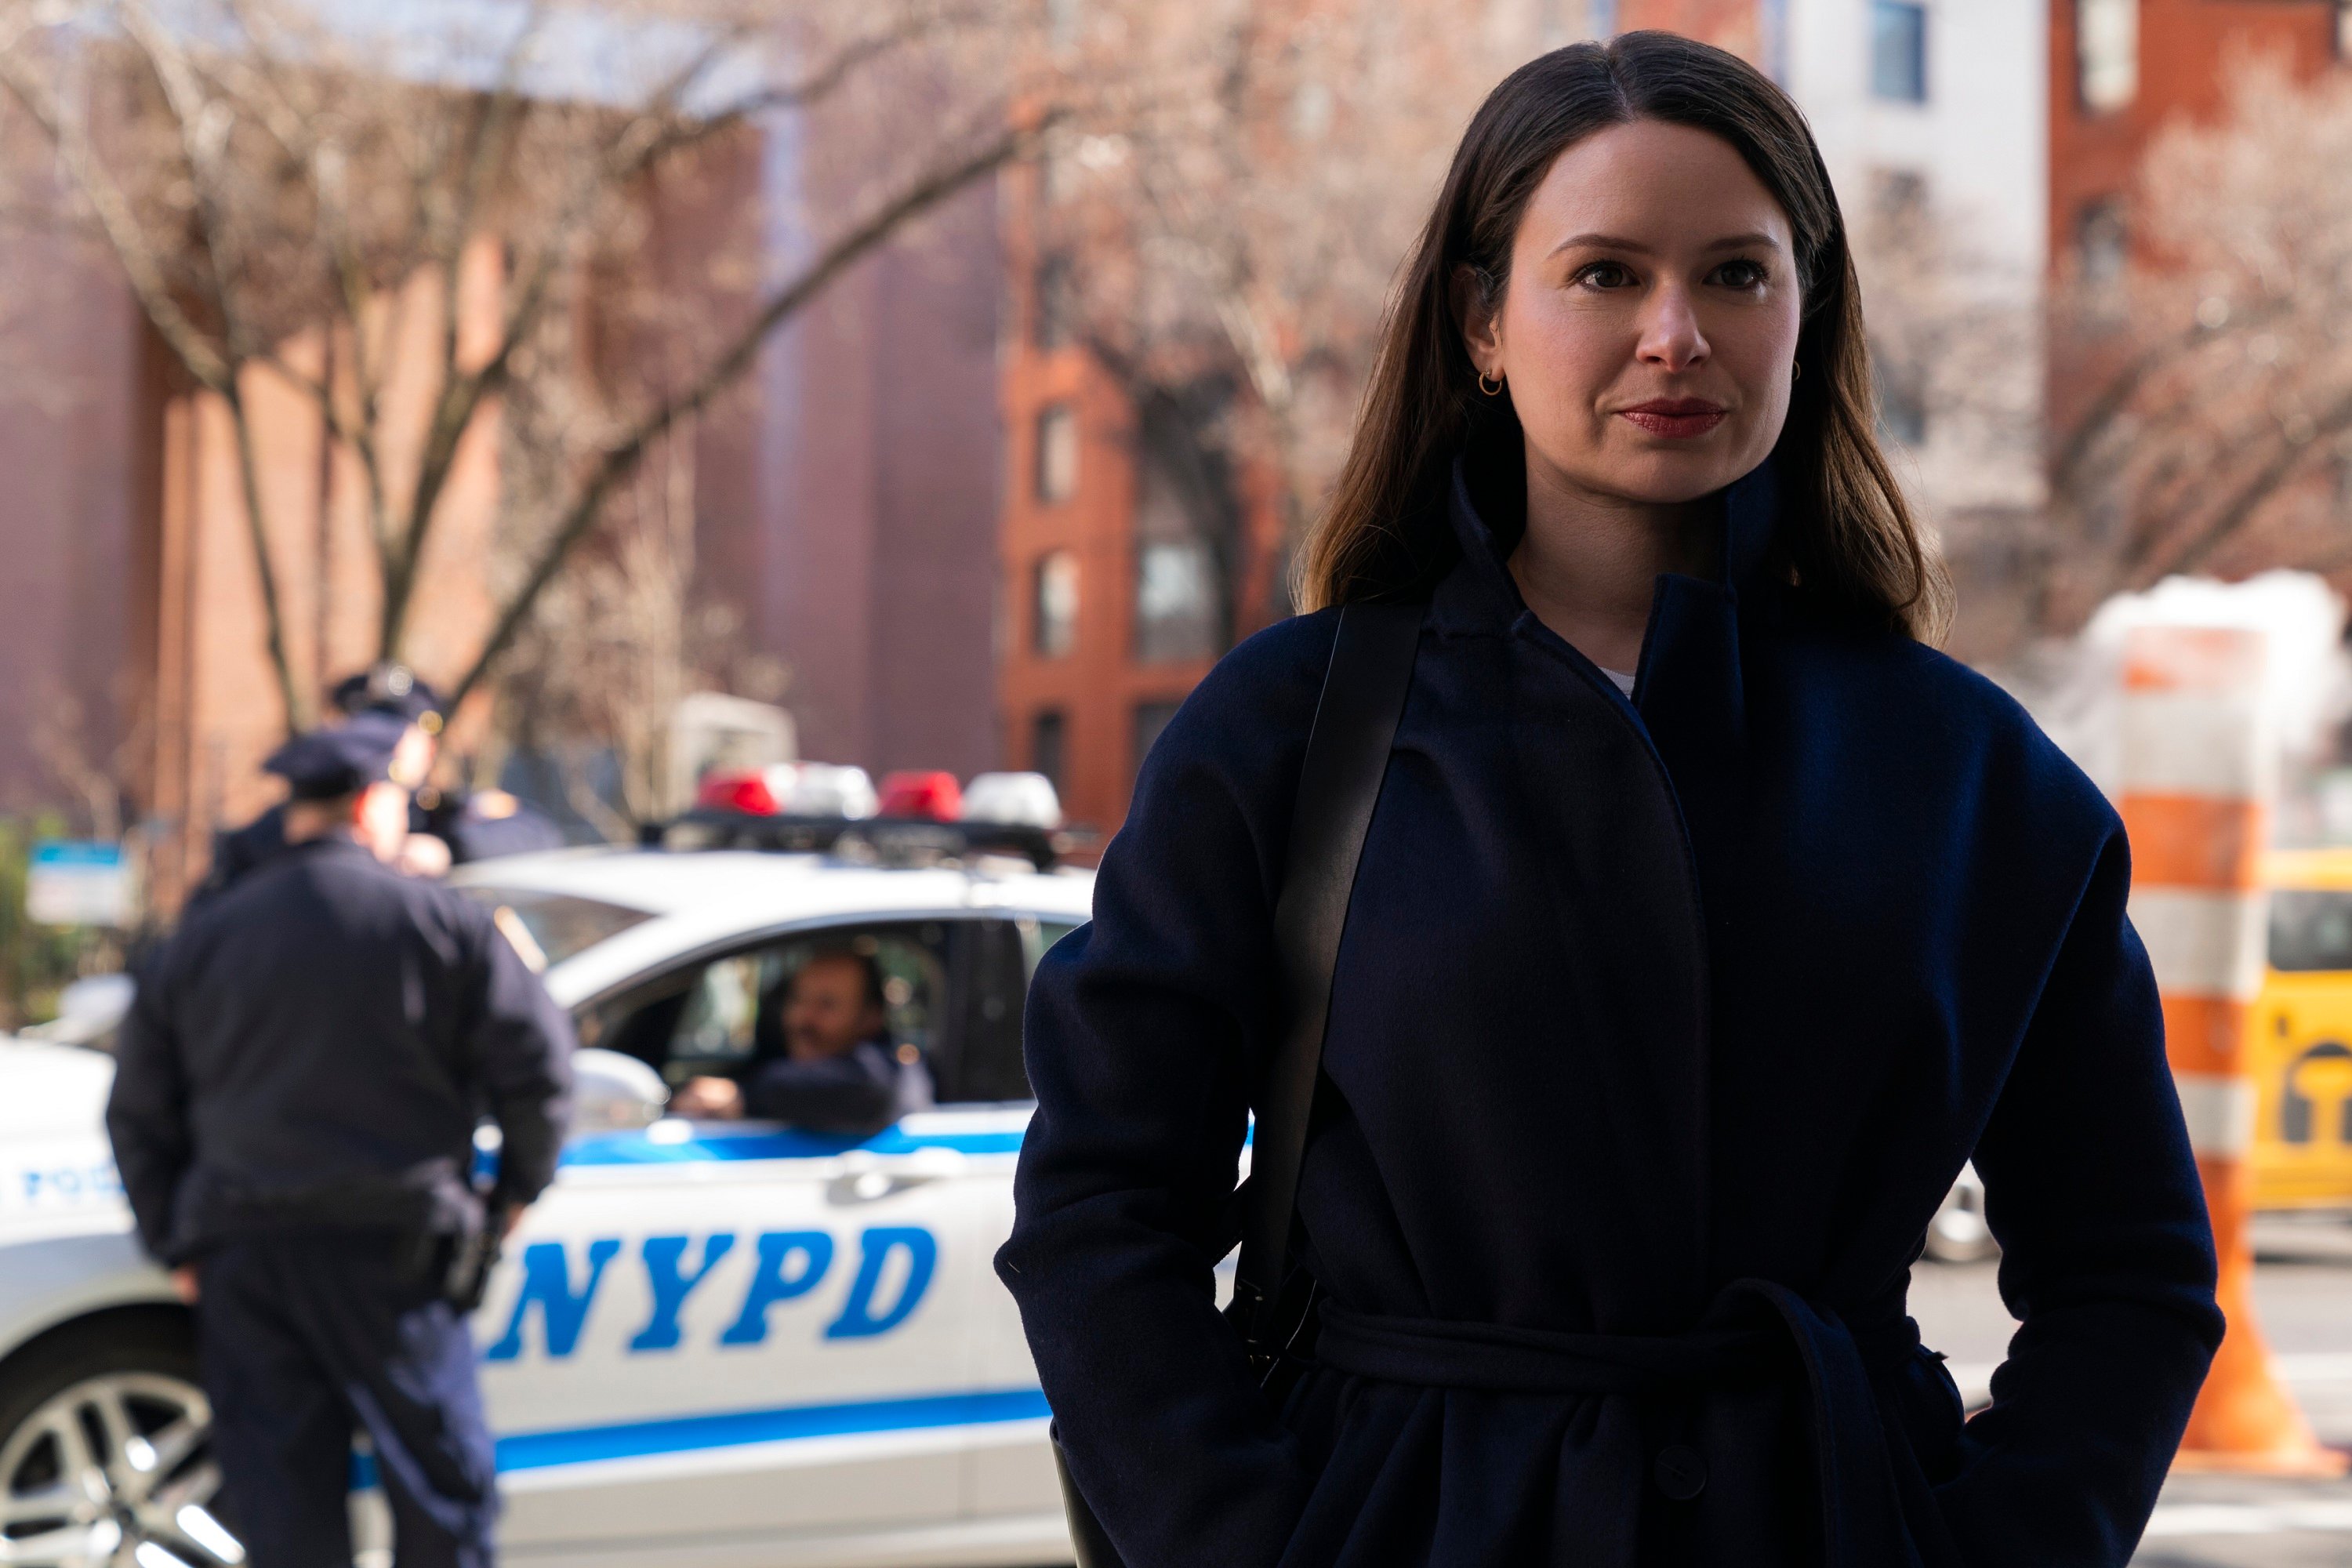 'Inventing Anna' cast member Katie Lowes portrays Rachel Williams standing in front of a police car.